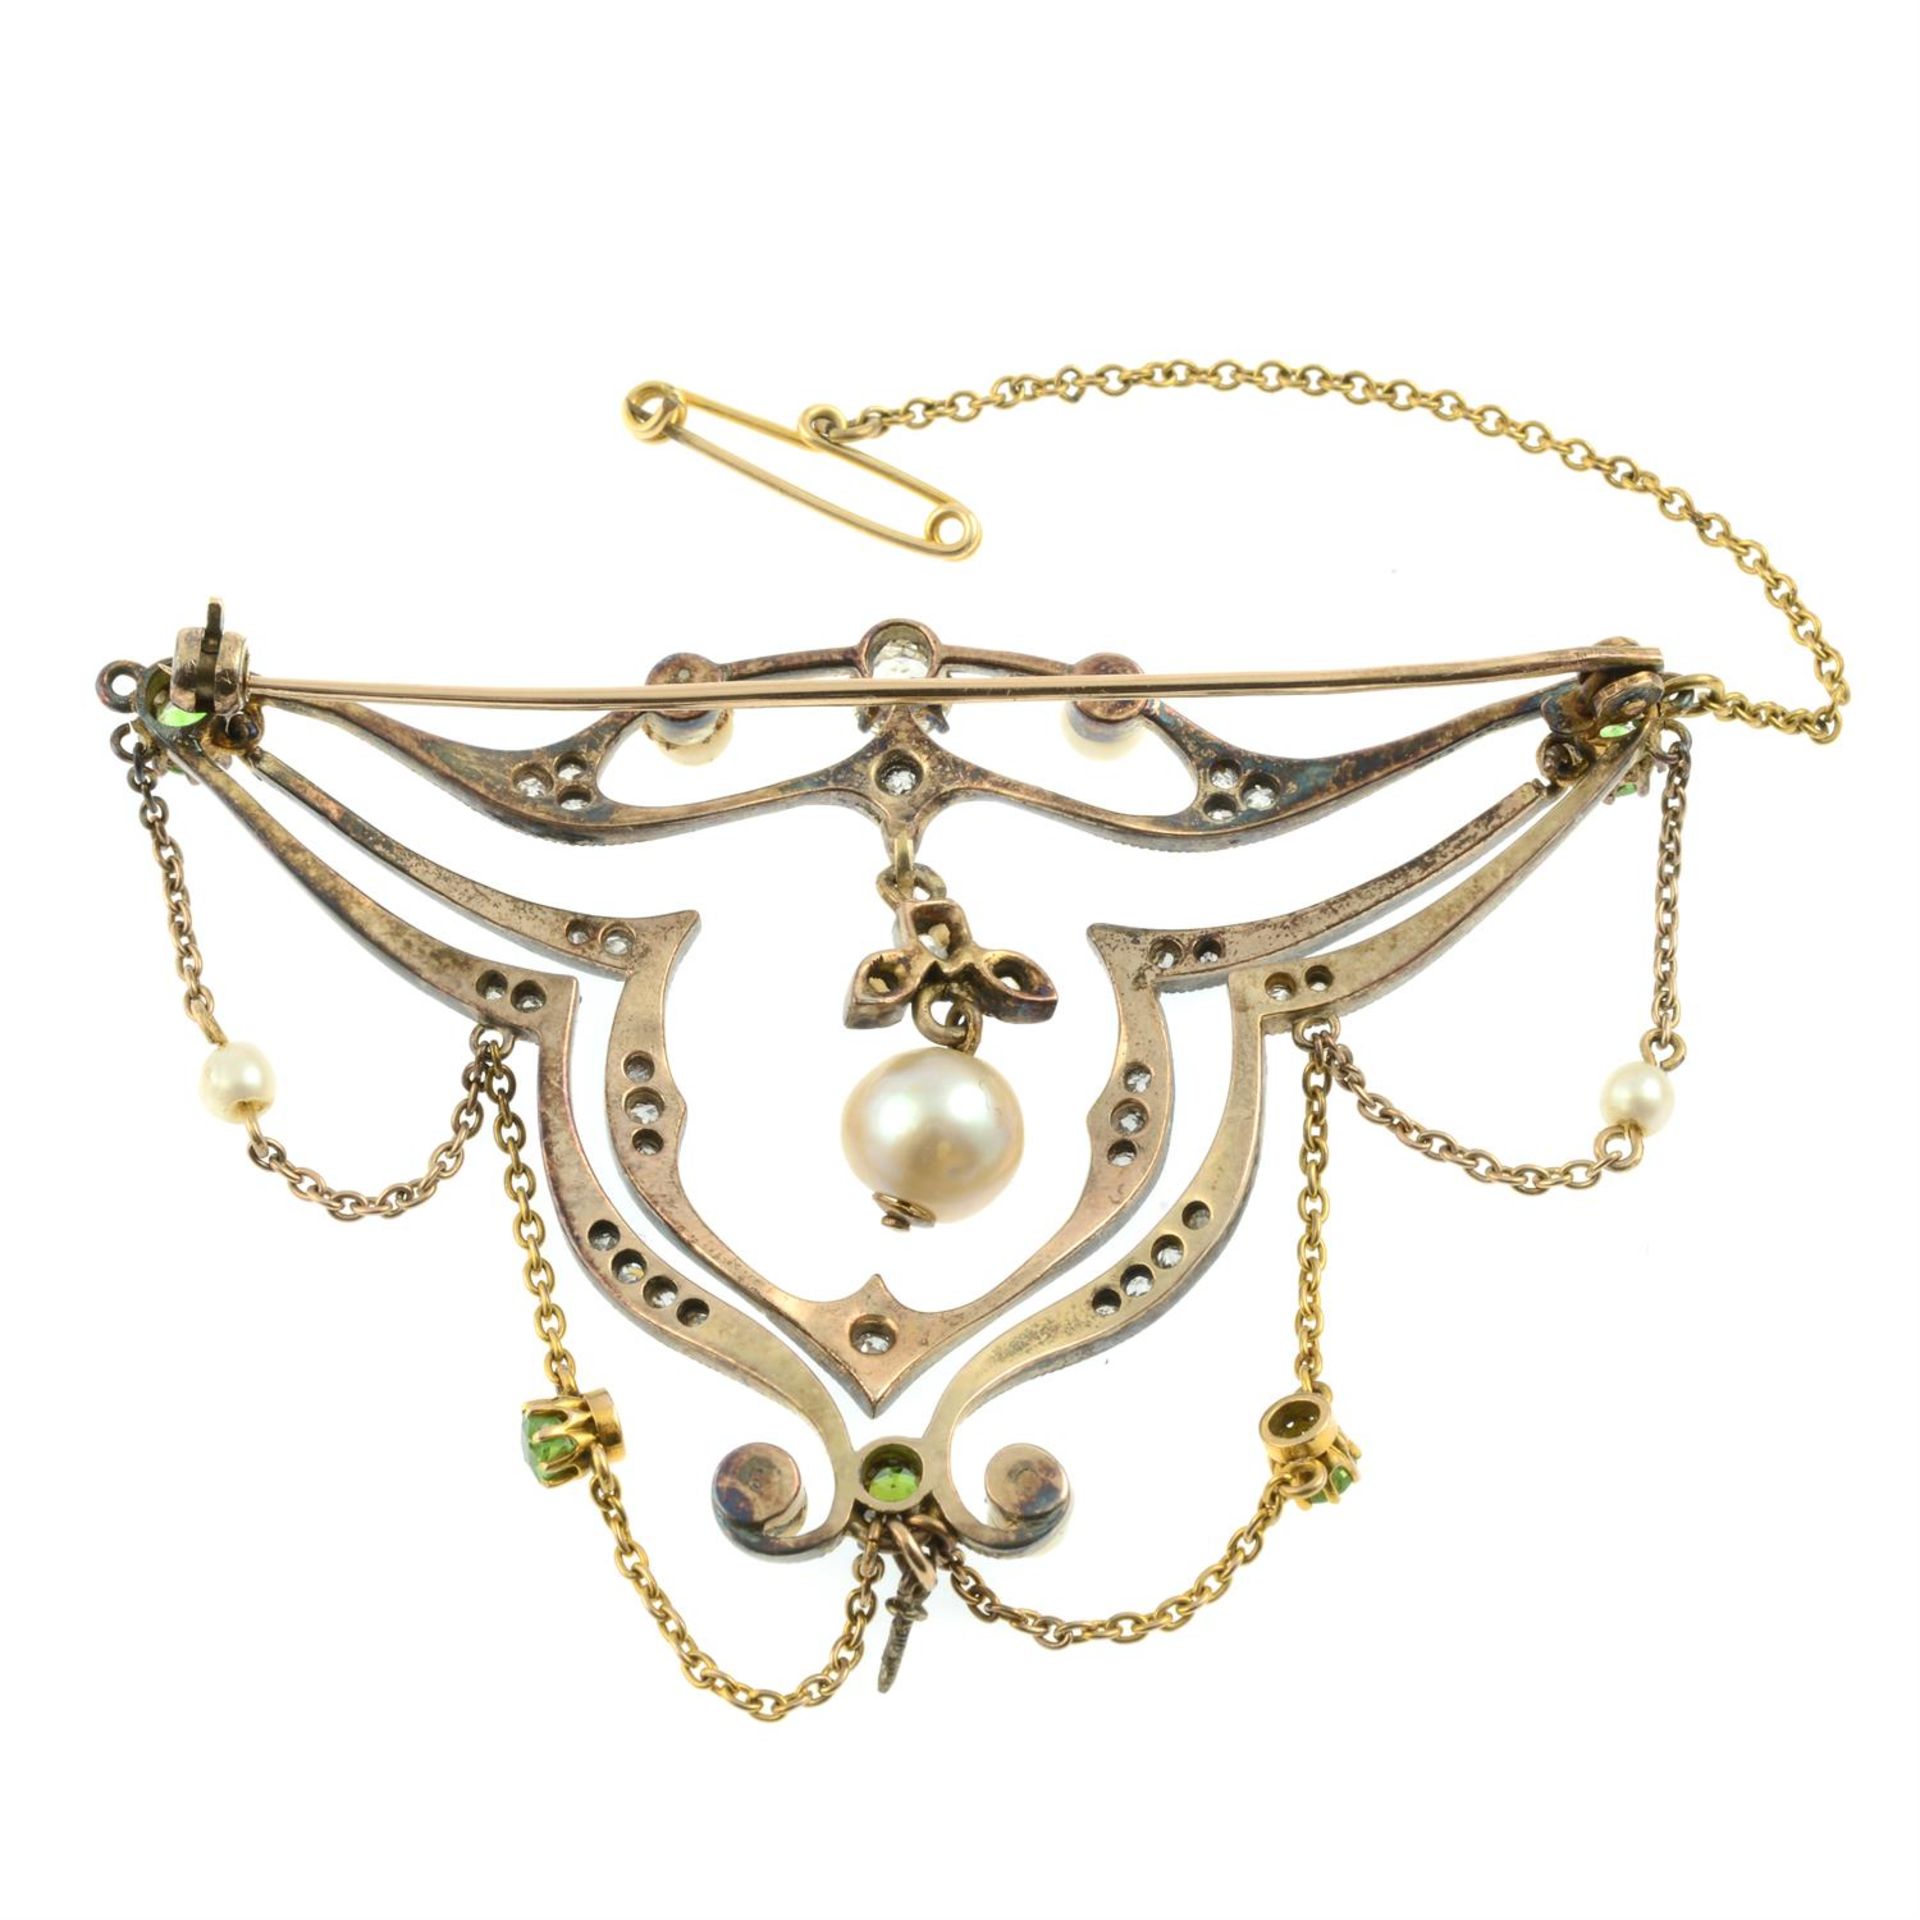 A late 19th century silver and gold, vari-cut diamond, demantoid garnet and pearl brooch. - Image 3 of 4